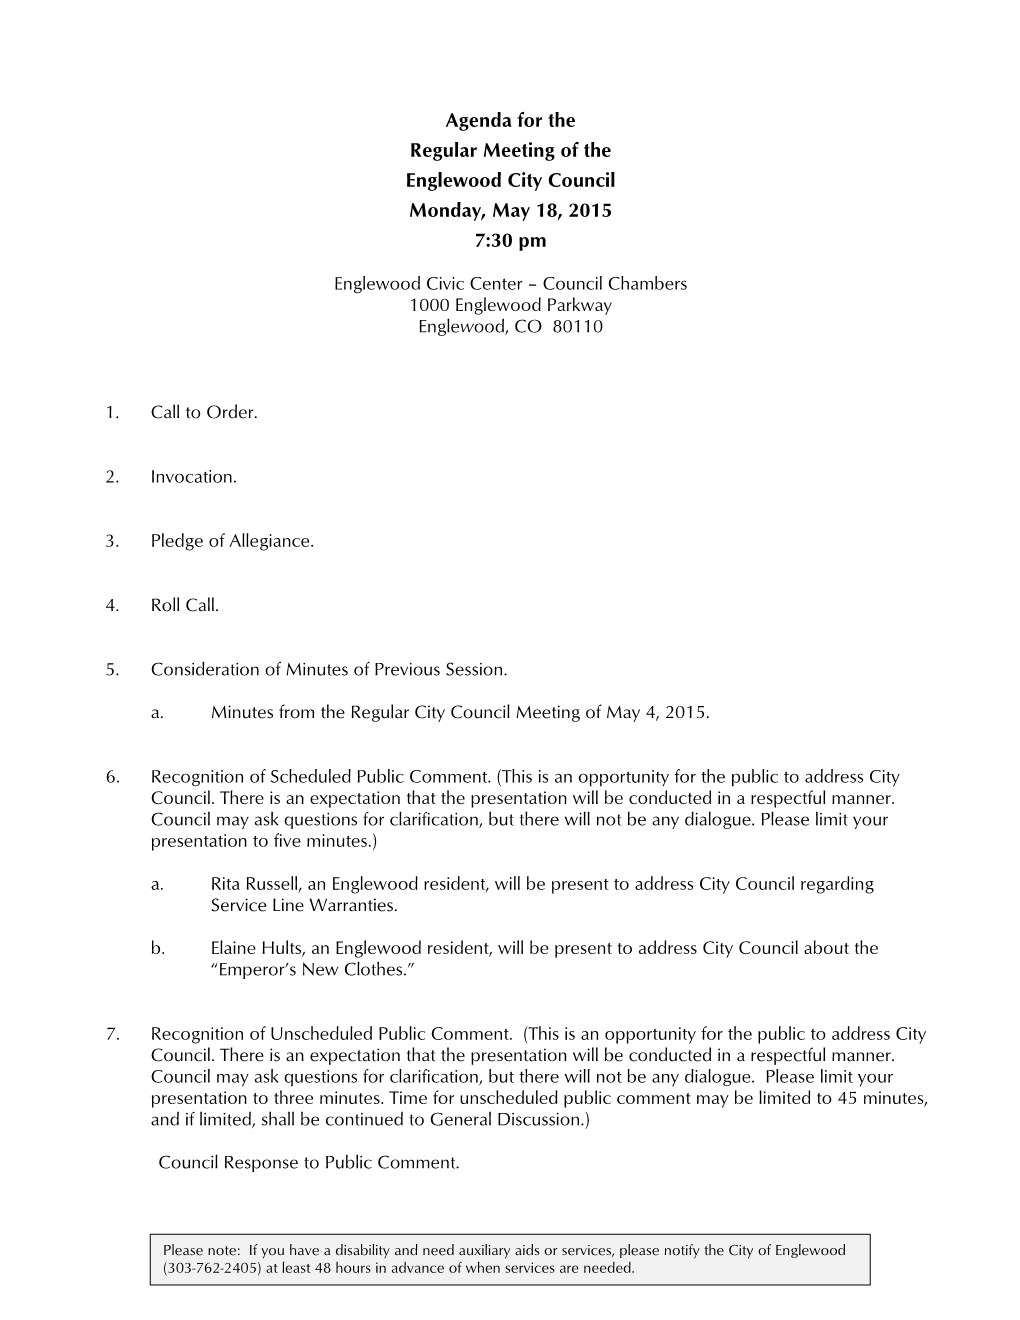 Agenda for the Regular Meeting of the Englewood City Council Monday, May 18, 2015 7:30 Pm